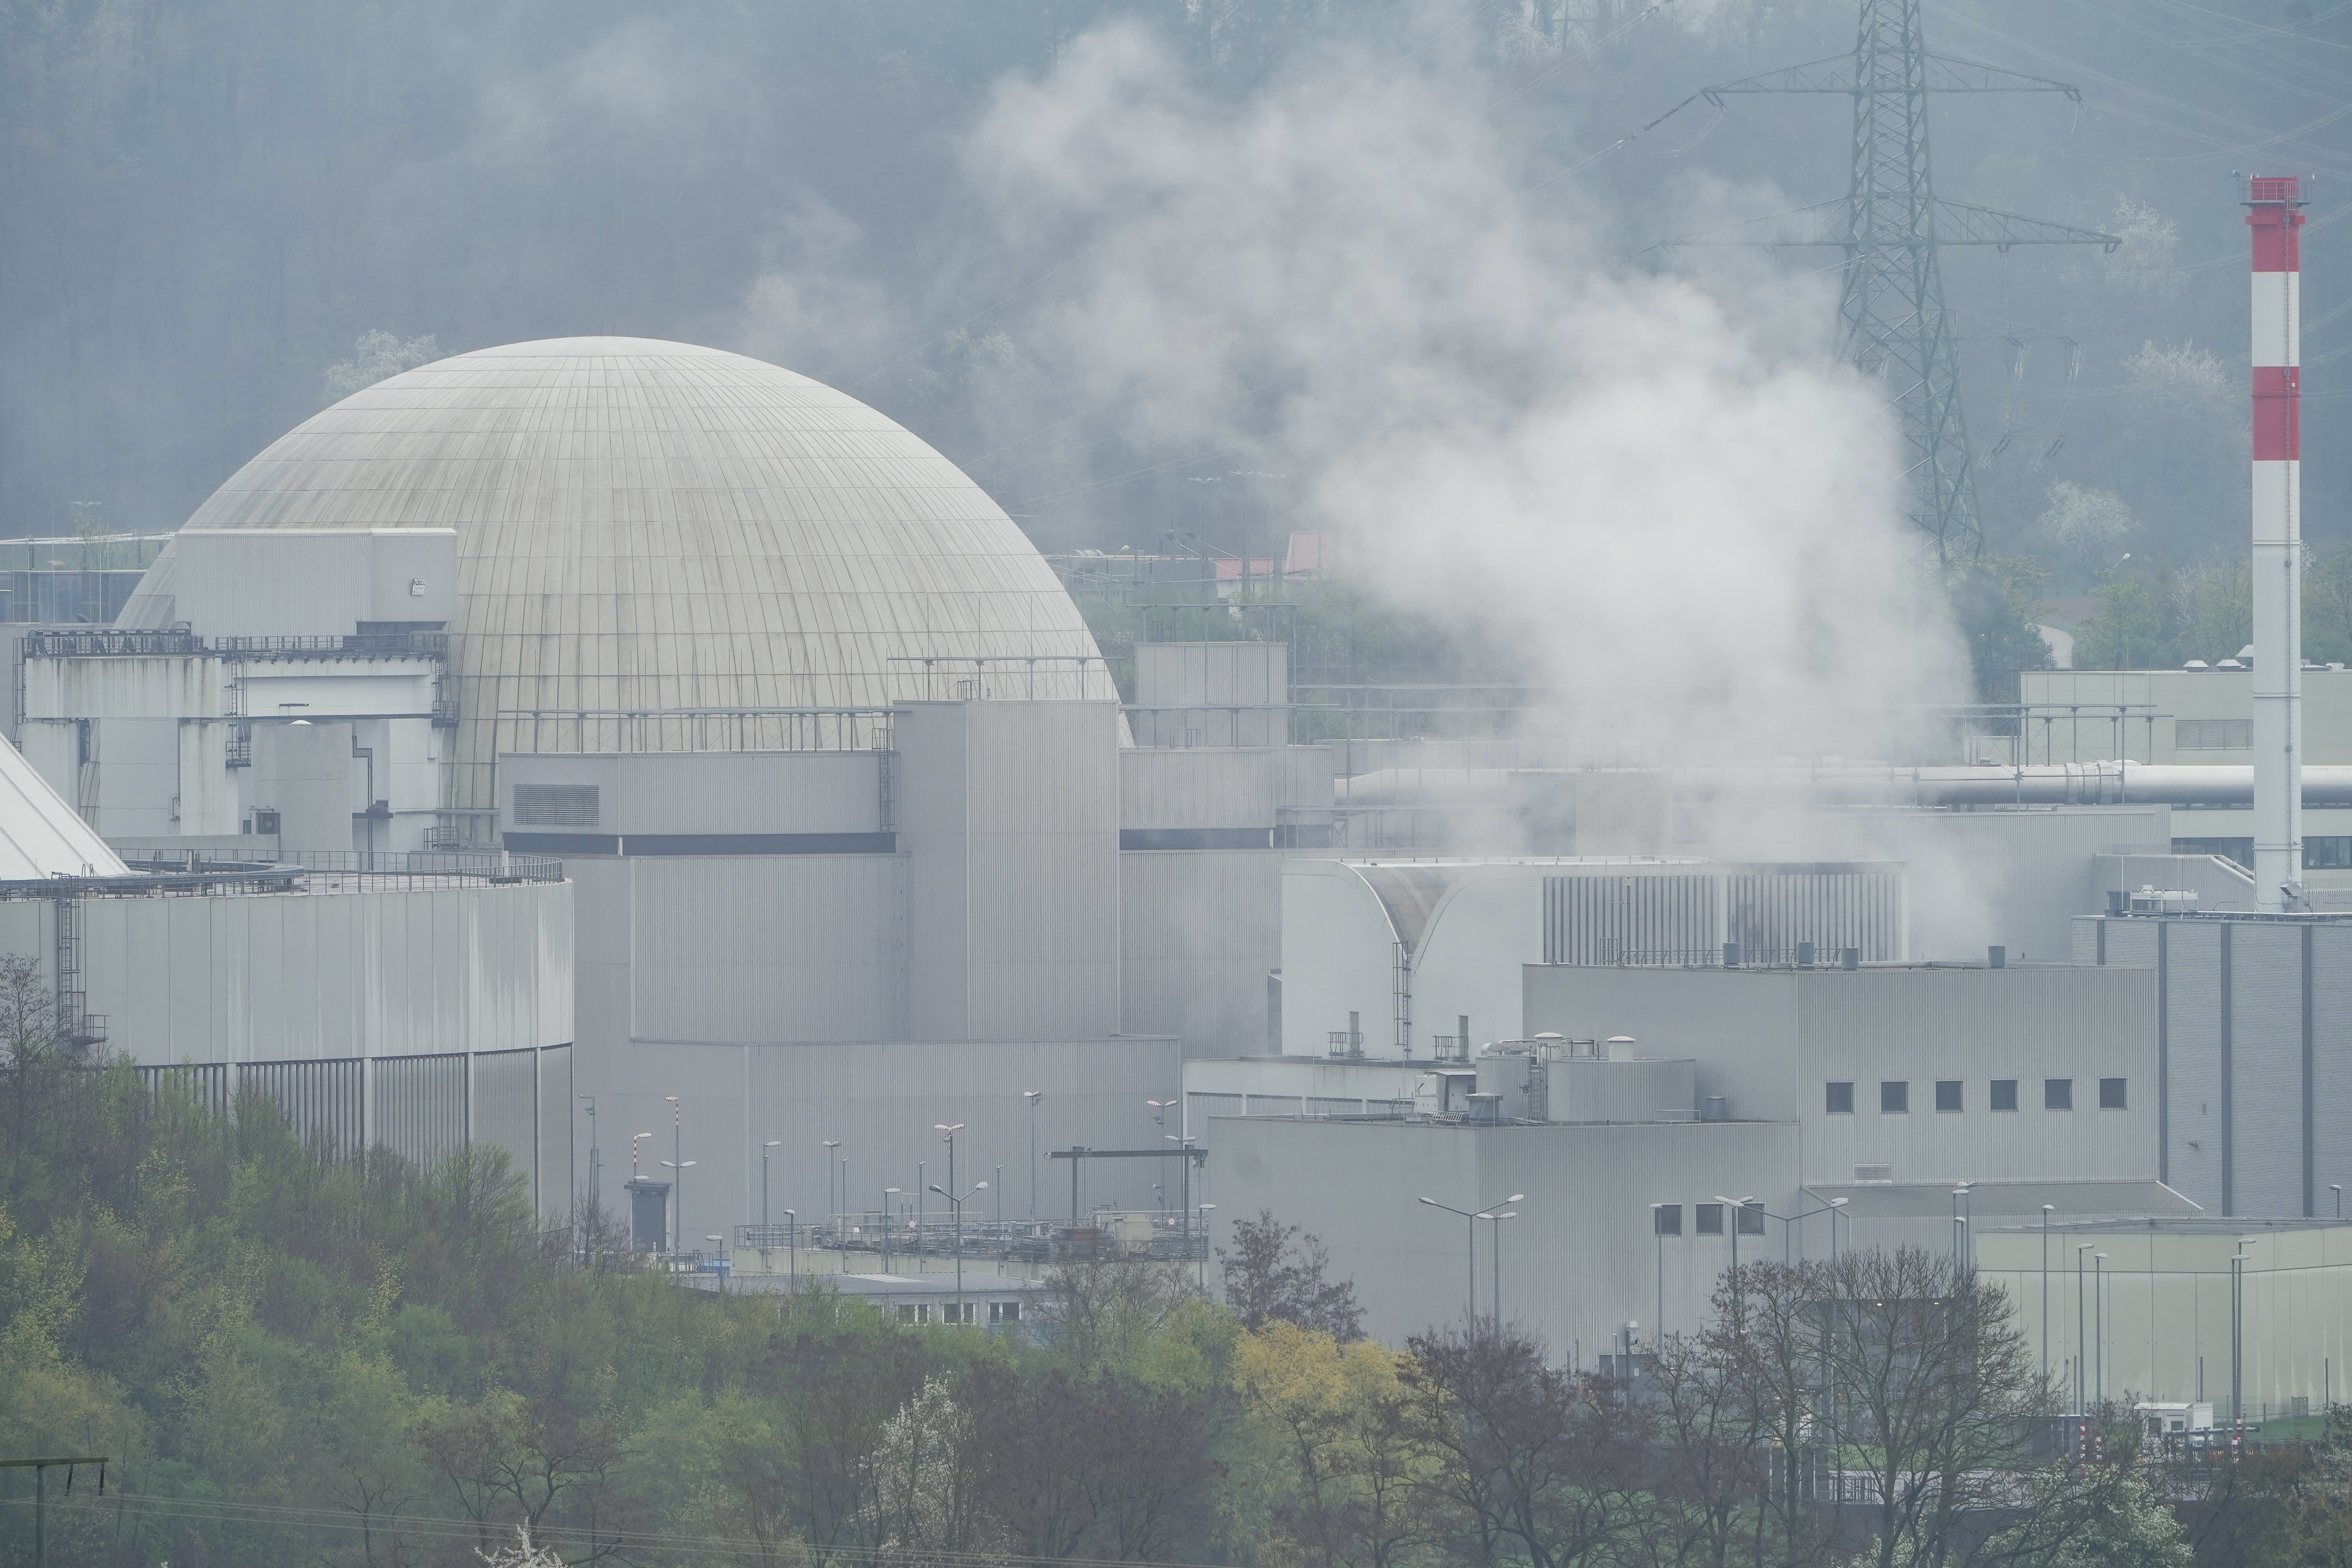 Germany shuts down last nuclear power plants, some scientists aghast